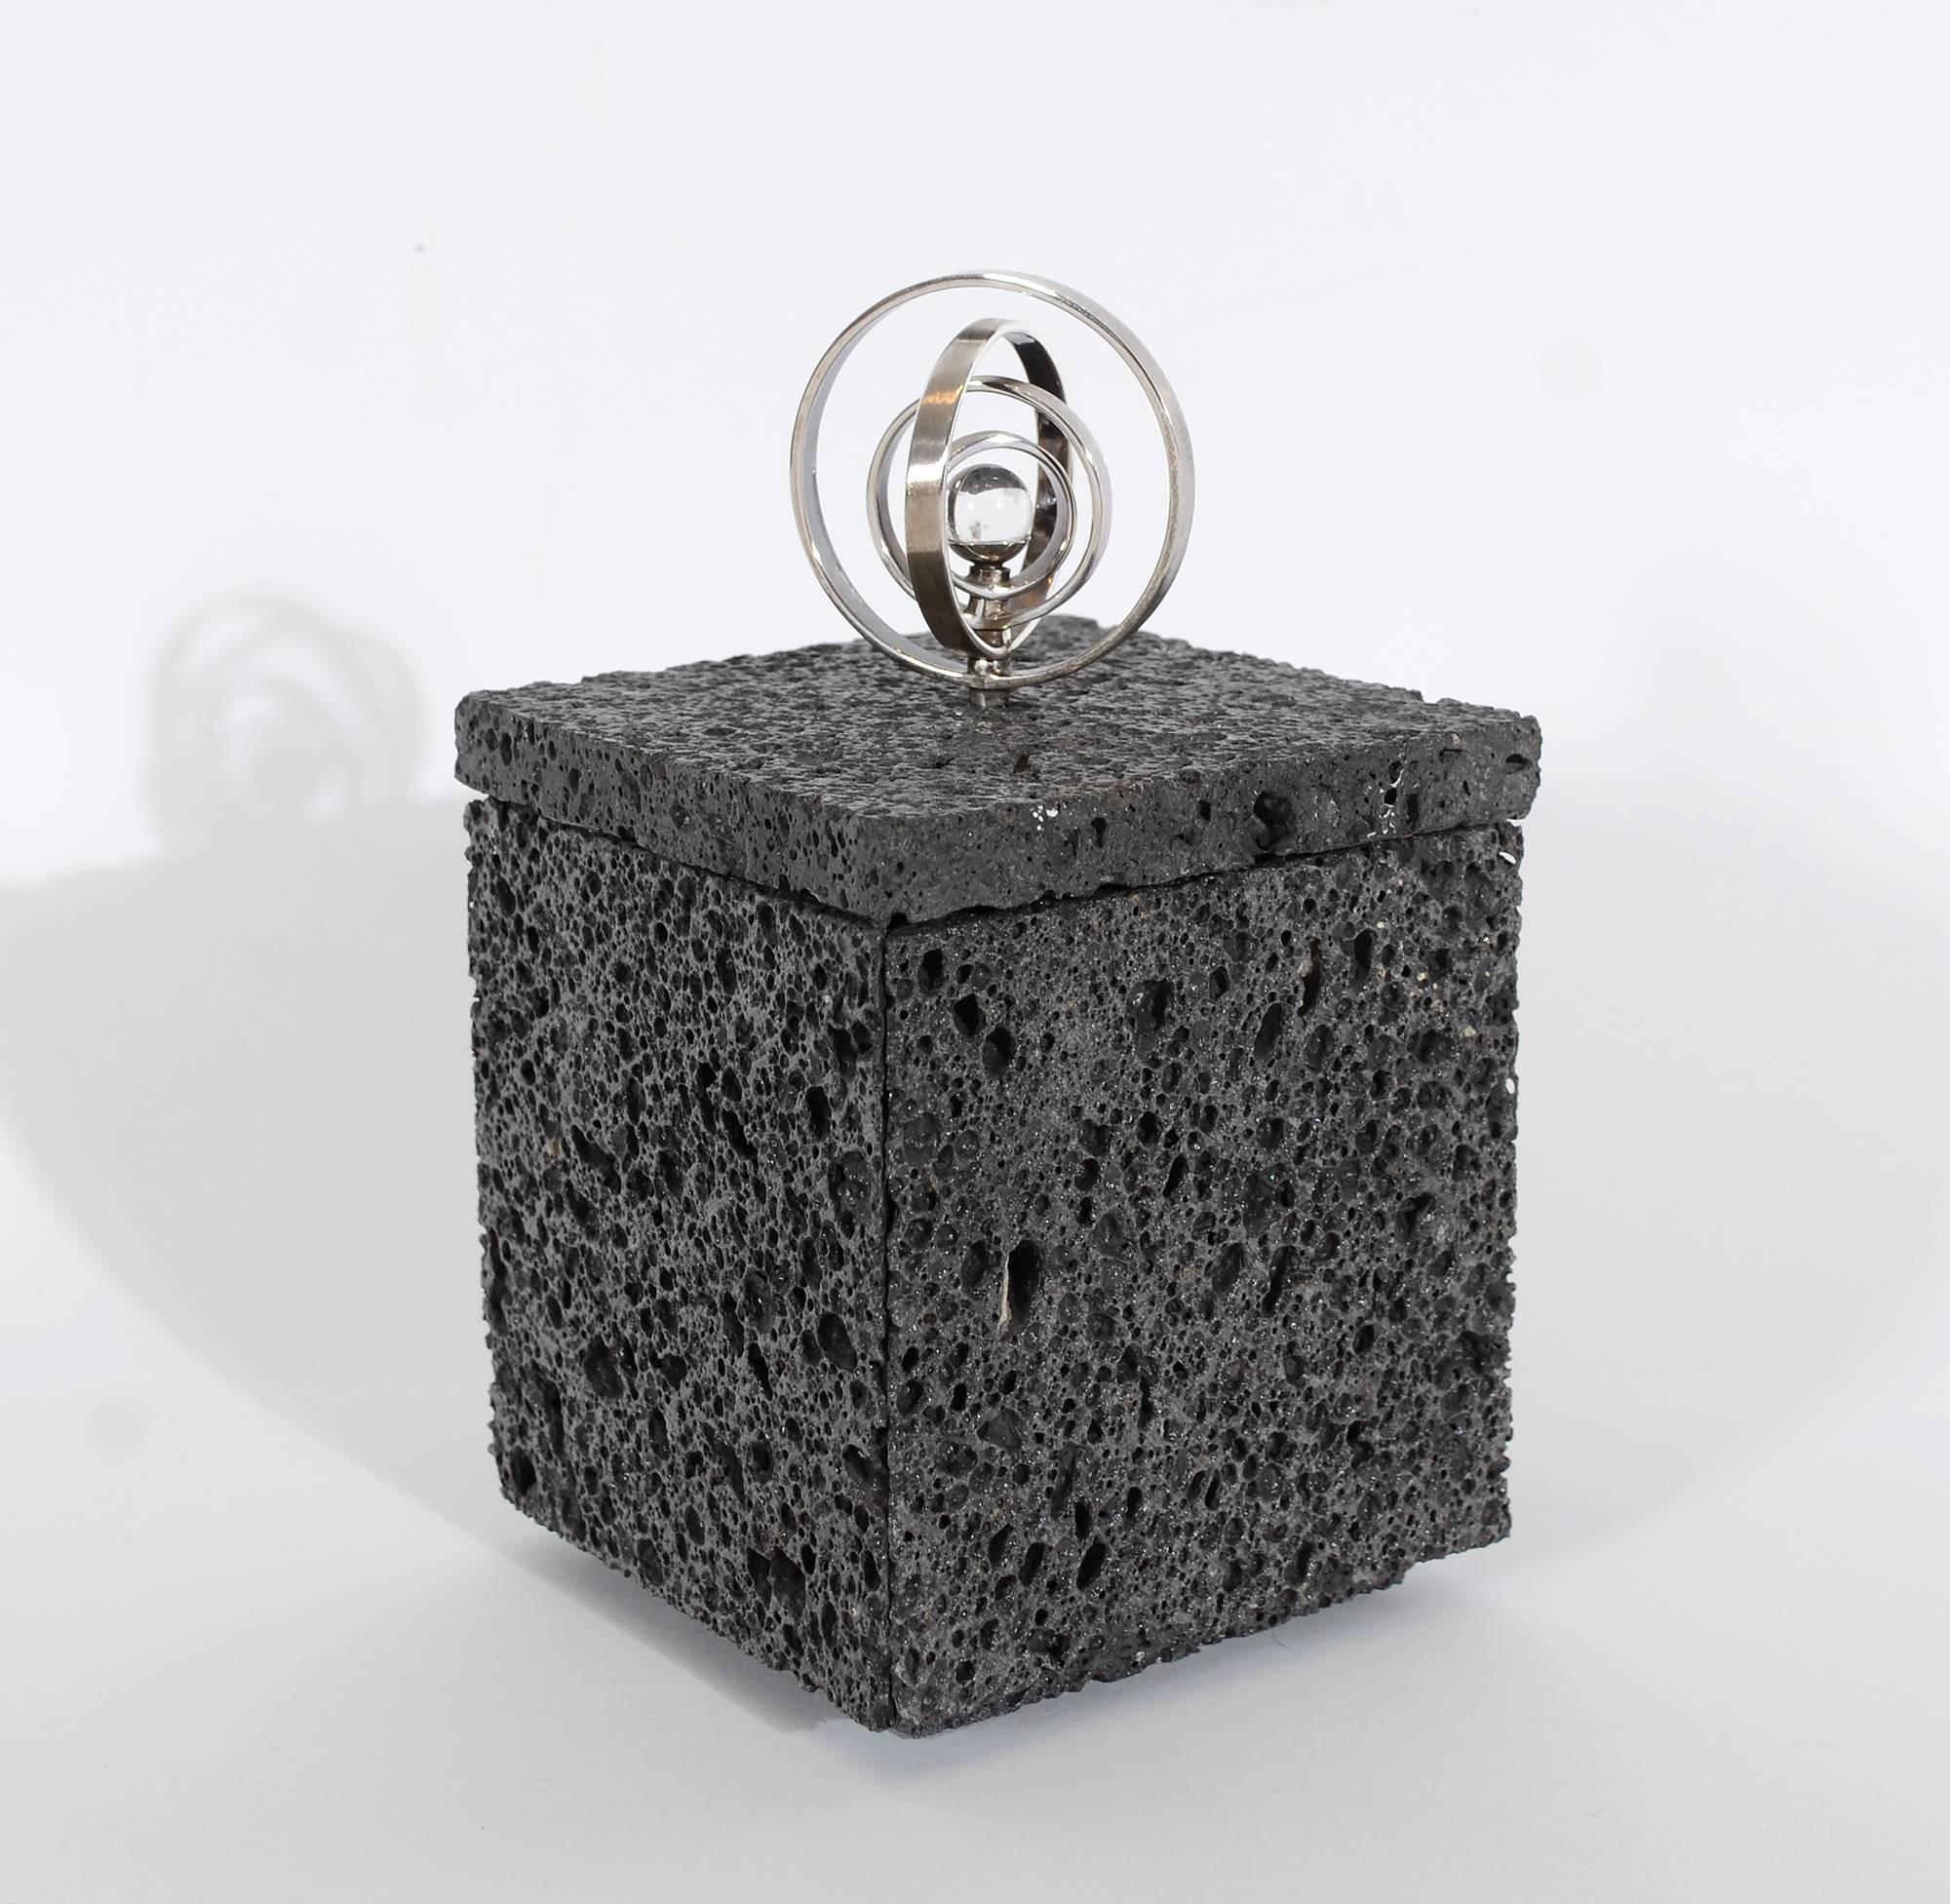 This box made of volcanic lava is topped with a sterling silver and crystal ball finial. The four silver circles are movable to create either a flat or three dimensional form. The interior of the box is lined with red leather. The box measures 3 1/8